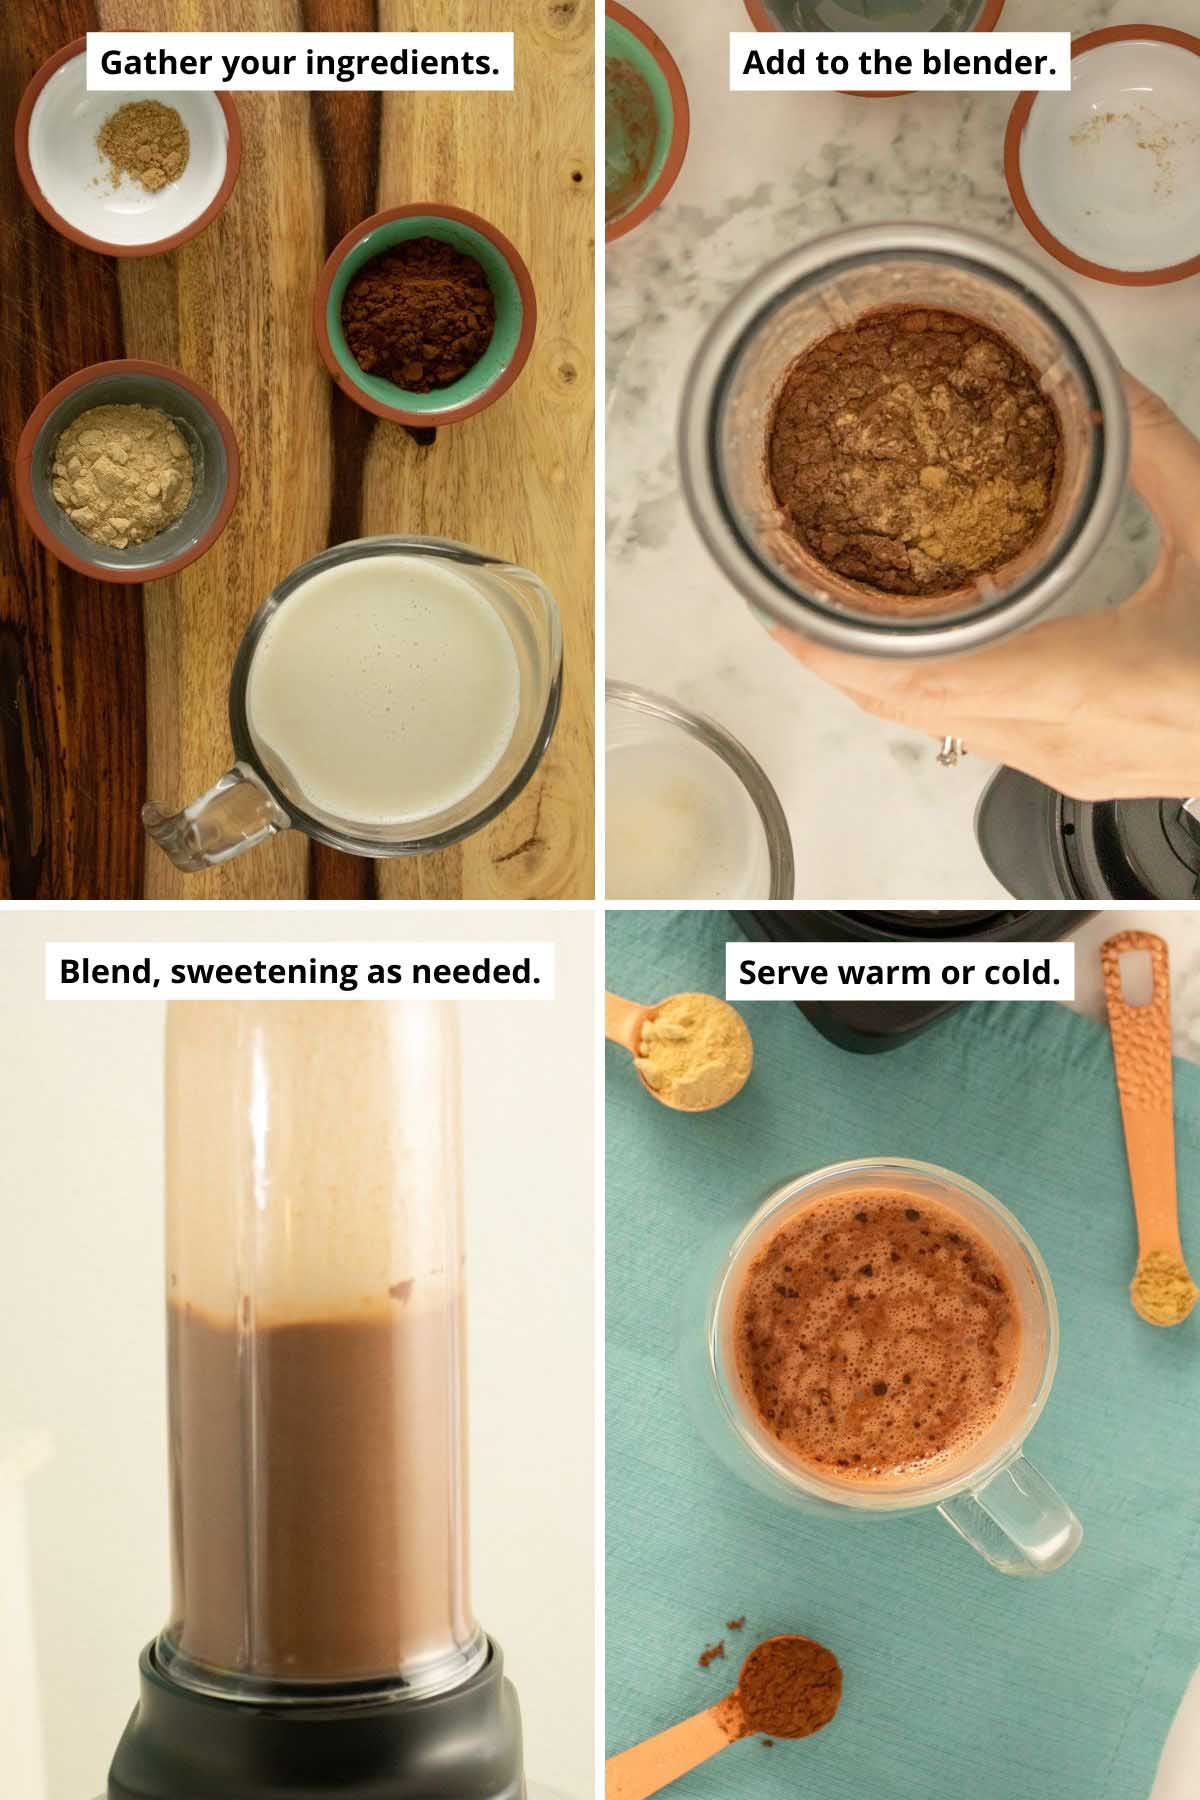 image collage showing the maca latte ingredients separate and in the blender, the blender running, and the finished maca hot chocolate on a table